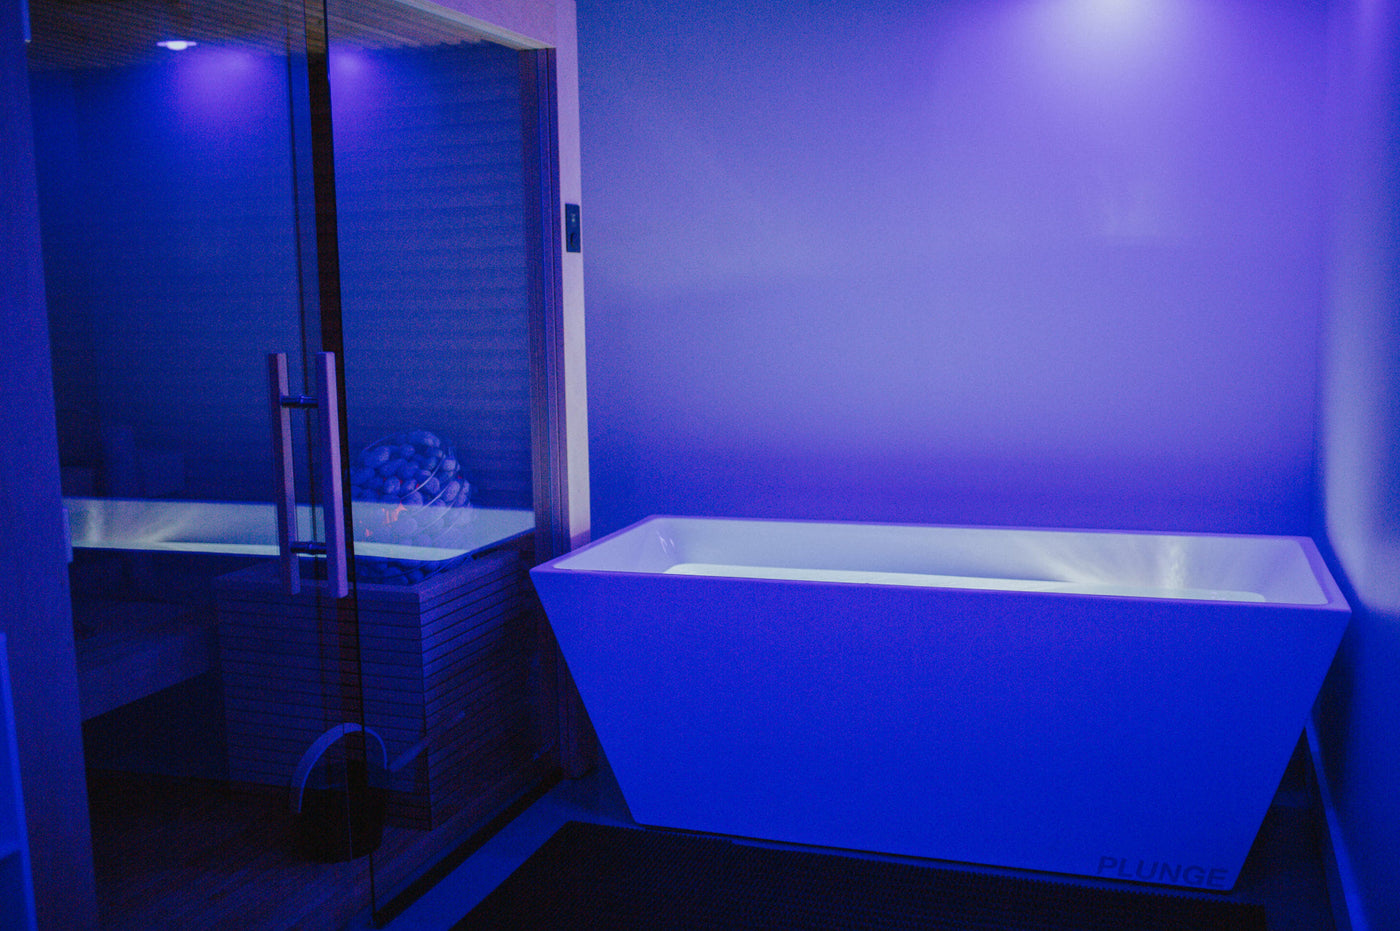 Private room with blue light